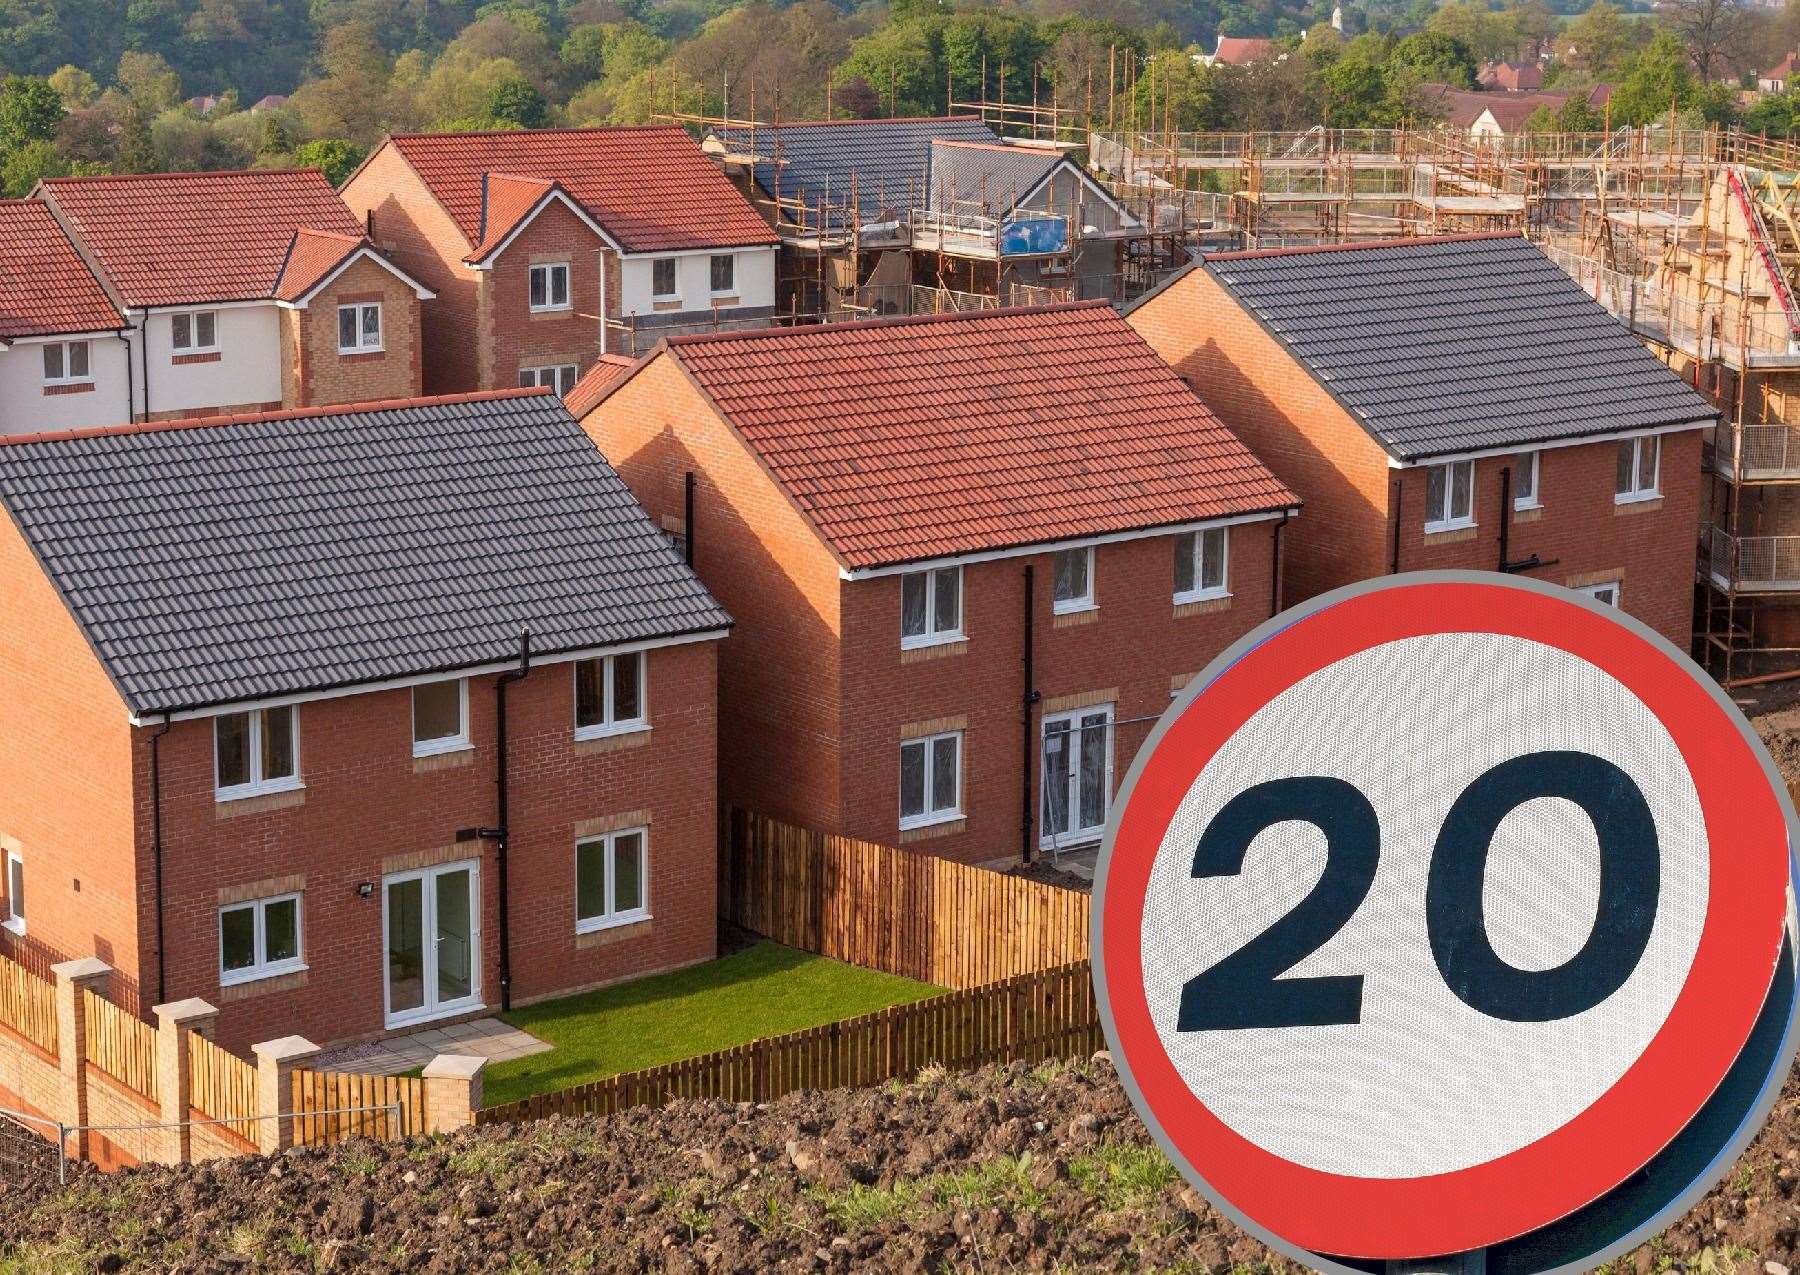 Kent County Council has been urged to insist that 20mph limits be imposed at all new housing developments